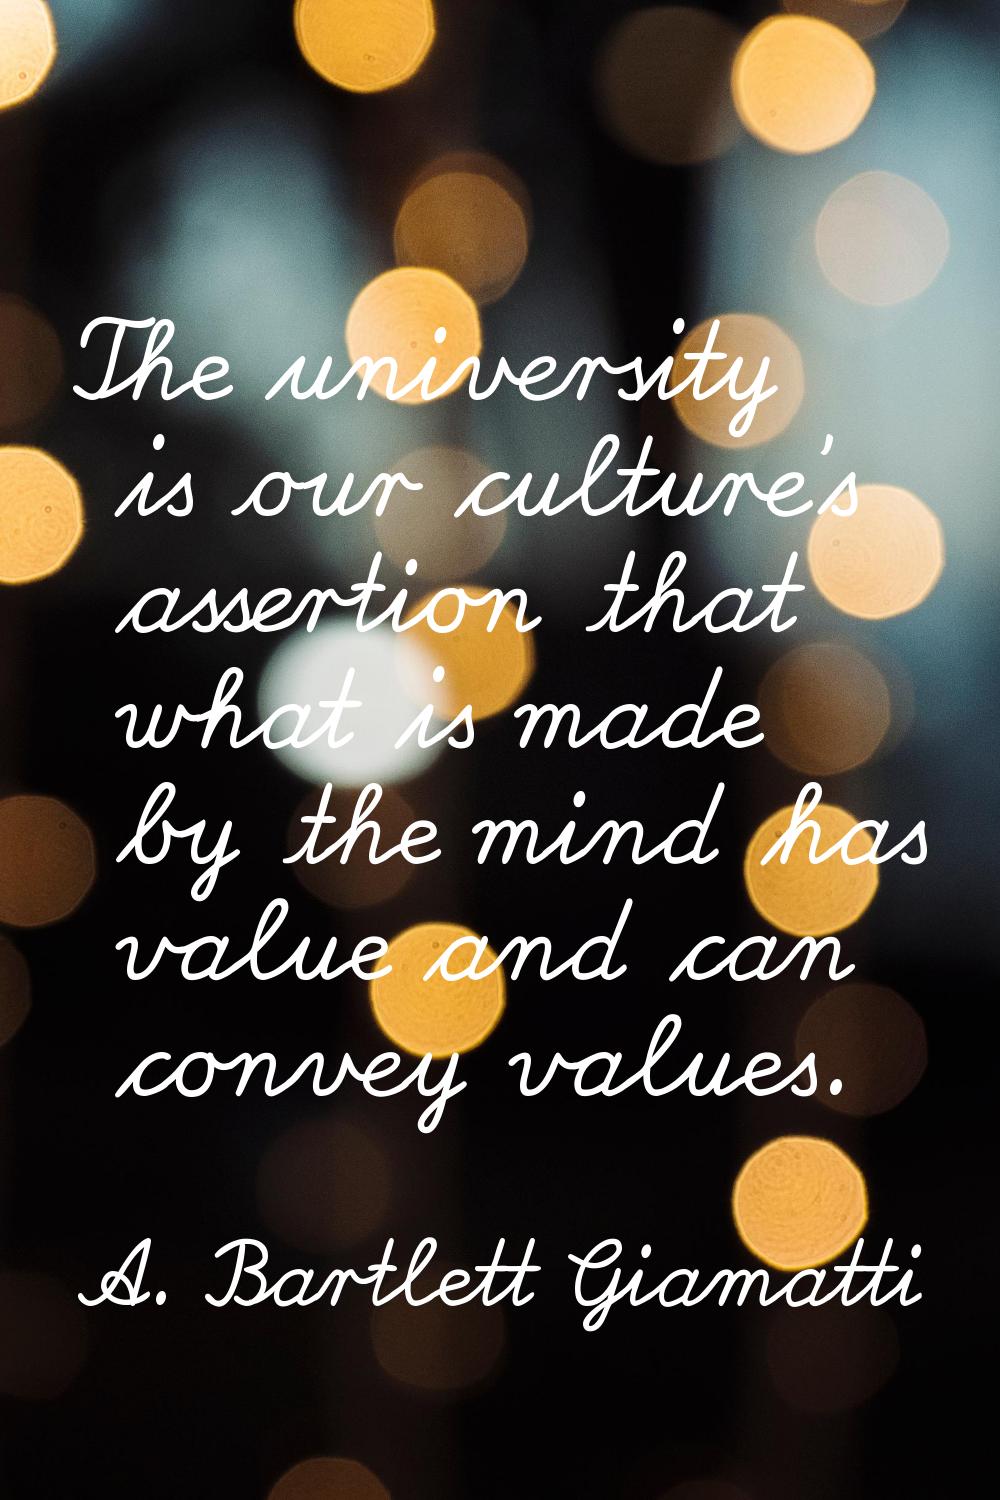 The university is our culture's assertion that what is made by the mind has value and can convey va